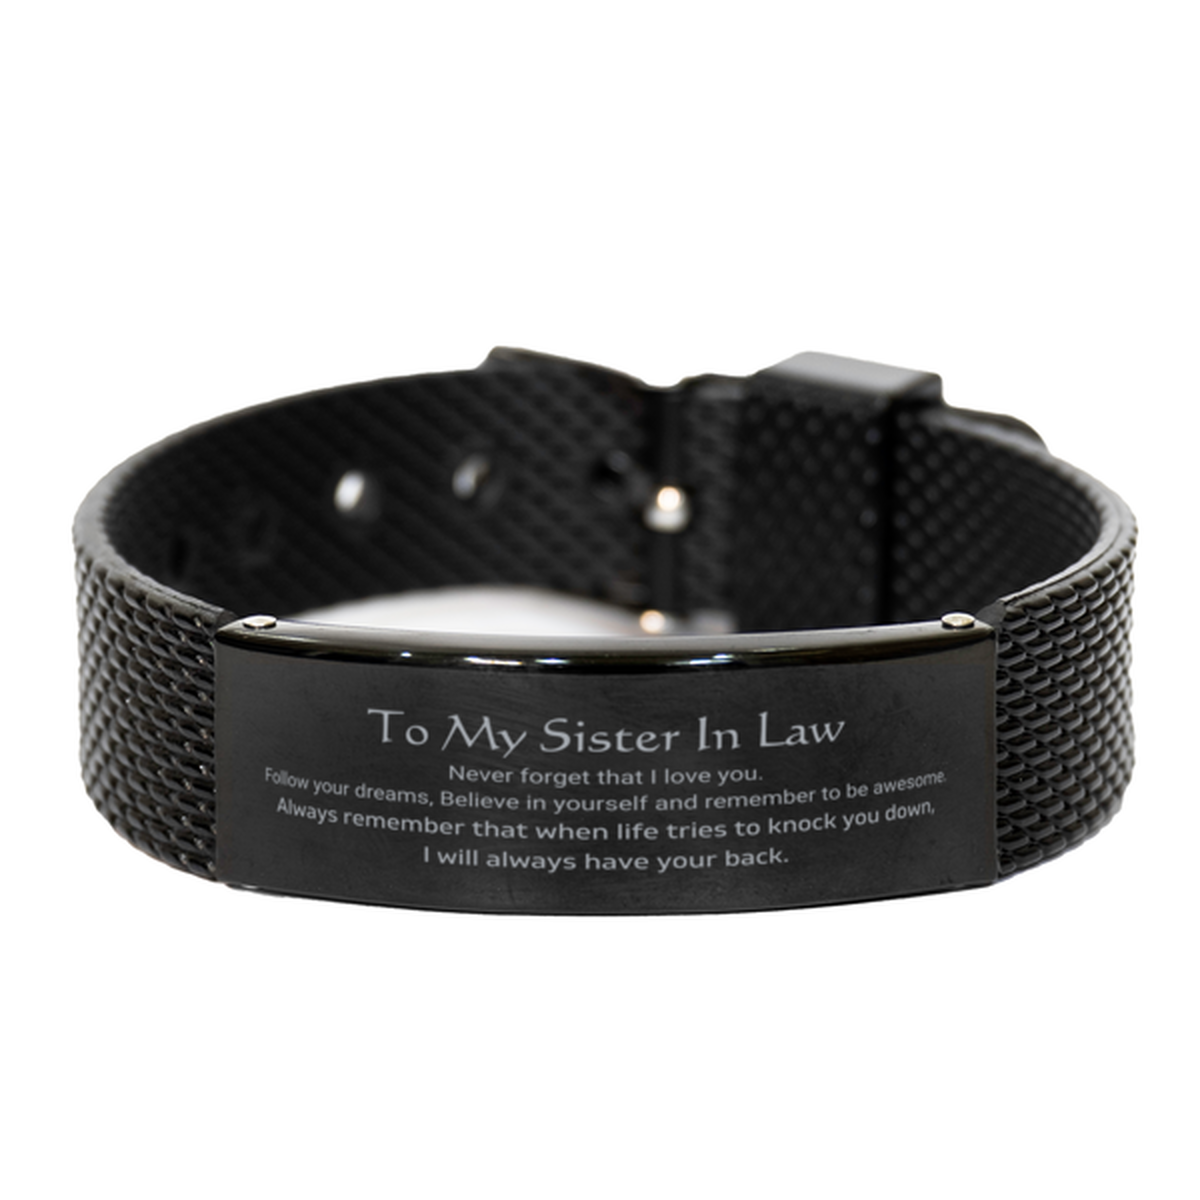 Inspirational Gifts for Sister In Law, Follow your dreams, Believe in yourself, Sister In Law Black Shark Mesh Bracelet, Birthday Christmas Unique Gifts For Sister In Law